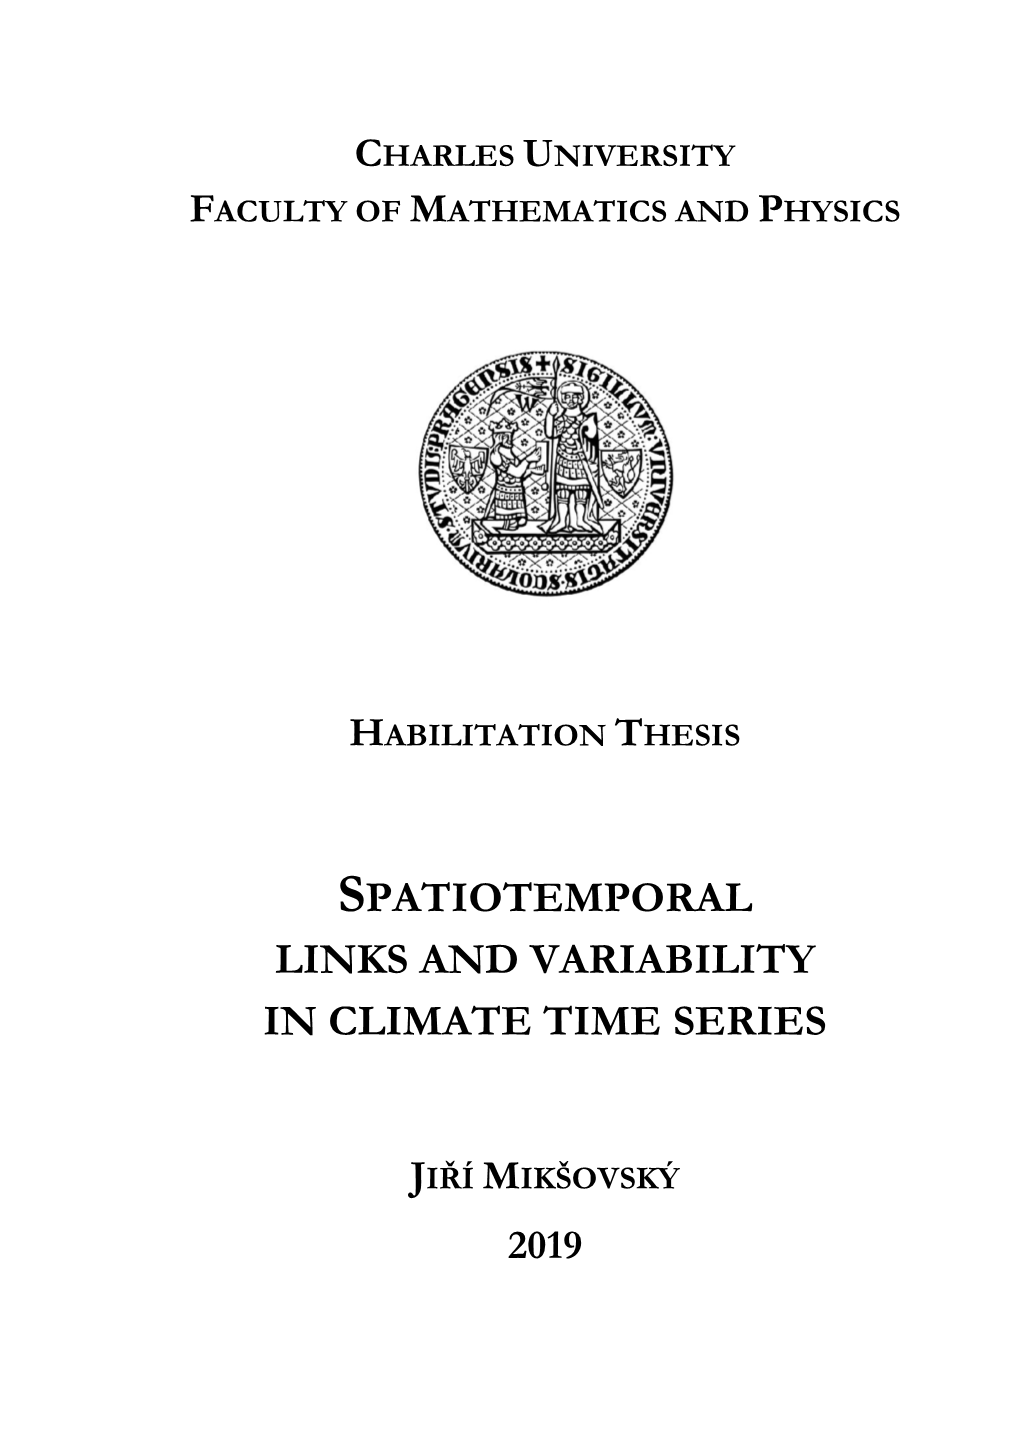 Spatiotemporal Links and Variability in Climate Time Series